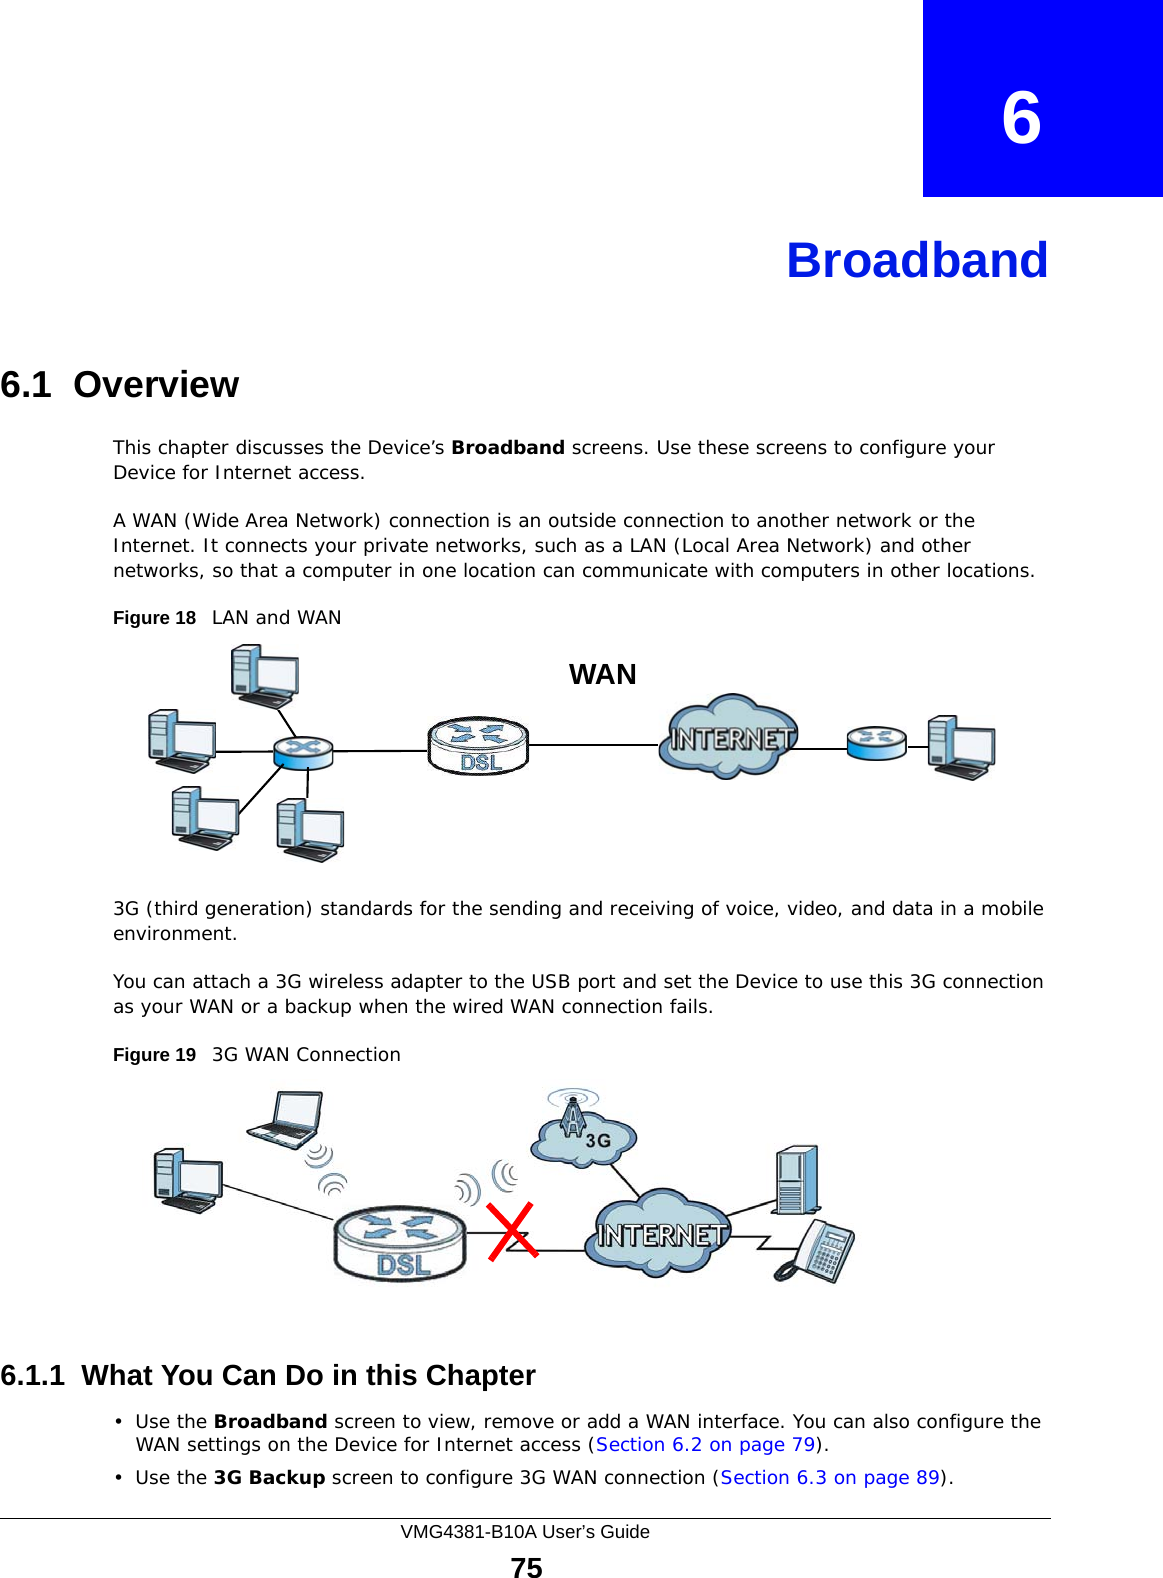 VMG4381-B10A User’s Guide75CHAPTER   6Broadband6.1  OverviewThis chapter discusses the Device’s Broadband screens. Use these screens to configure your Device for Internet access.A WAN (Wide Area Network) connection is an outside connection to another network or the Internet. It connects your private networks, such as a LAN (Local Area Network) and other networks, so that a computer in one location can communicate with computers in other locations.Figure 18   LAN and WAN3G (third generation) standards for the sending and receiving of voice, video, and data in a mobile environment. You can attach a 3G wireless adapter to the USB port and set the Device to use this 3G connection as your WAN or a backup when the wired WAN connection fails.Figure 19   3G WAN Connection 6.1.1  What You Can Do in this Chapter•Use the Broadband screen to view, remove or add a WAN interface. You can also configure the WAN settings on the Device for Internet access (Section 6.2 on page 79).•Use the 3G Backup screen to configure 3G WAN connection (Section 6.3 on page 89). WAN